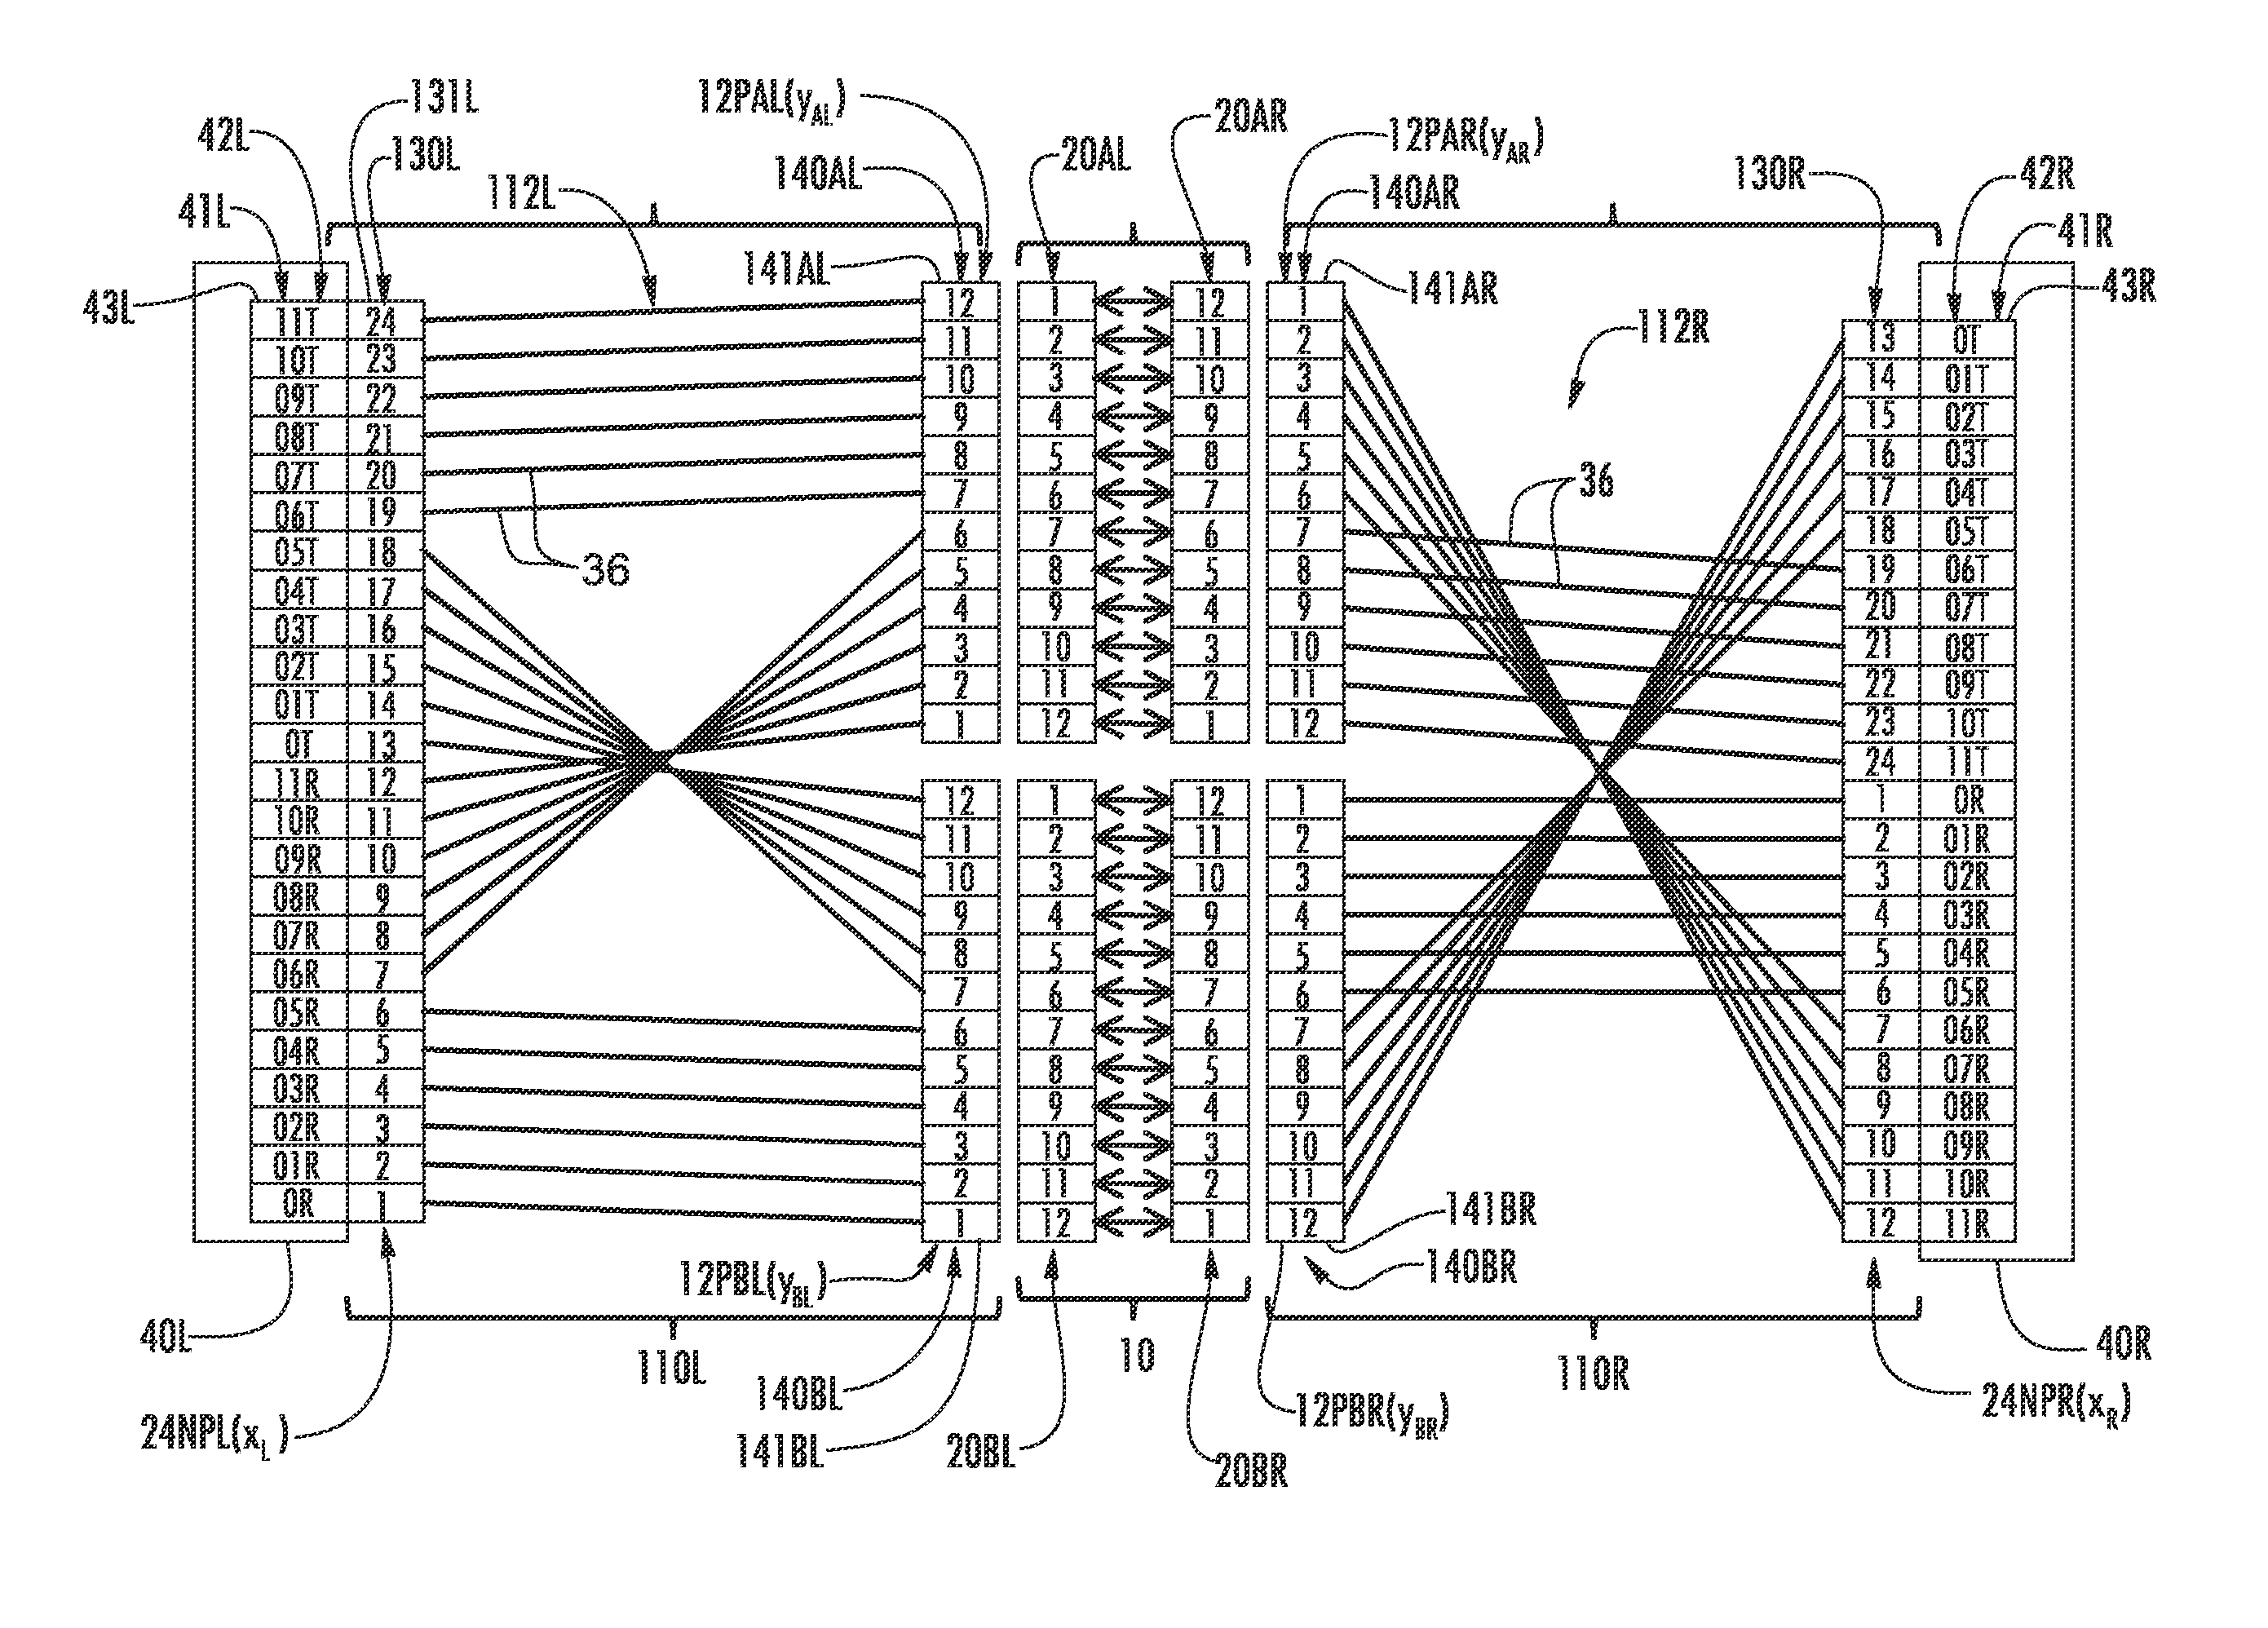 Optical interconnection methods for high-speed data-rate optical transport systems